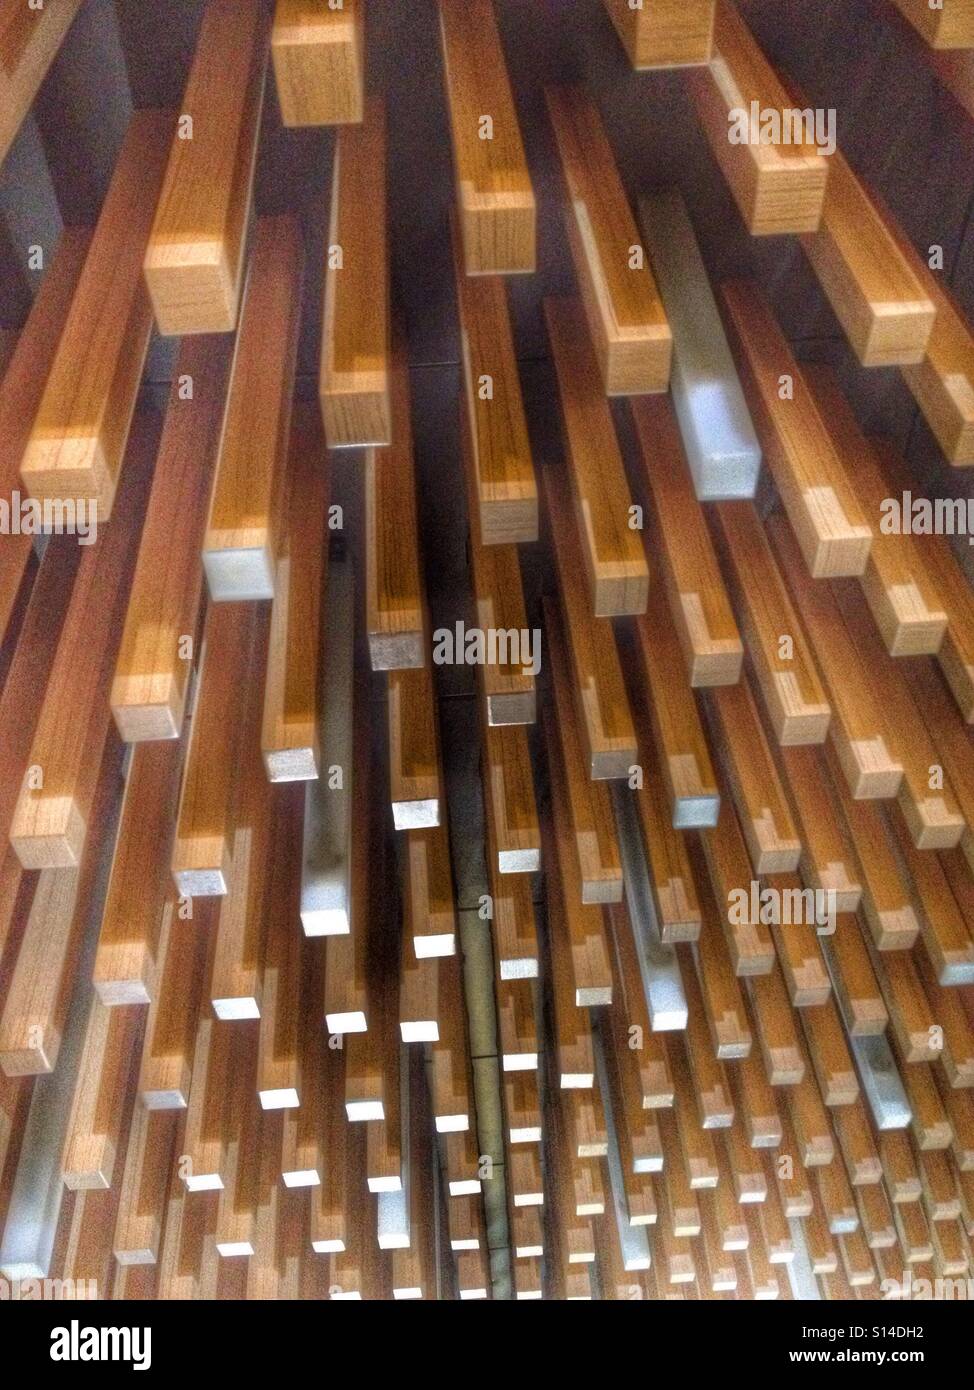 Wooden Blocks Hanging Downwards From The Ceiling, Epic Art Installation Matrix Stock Photo